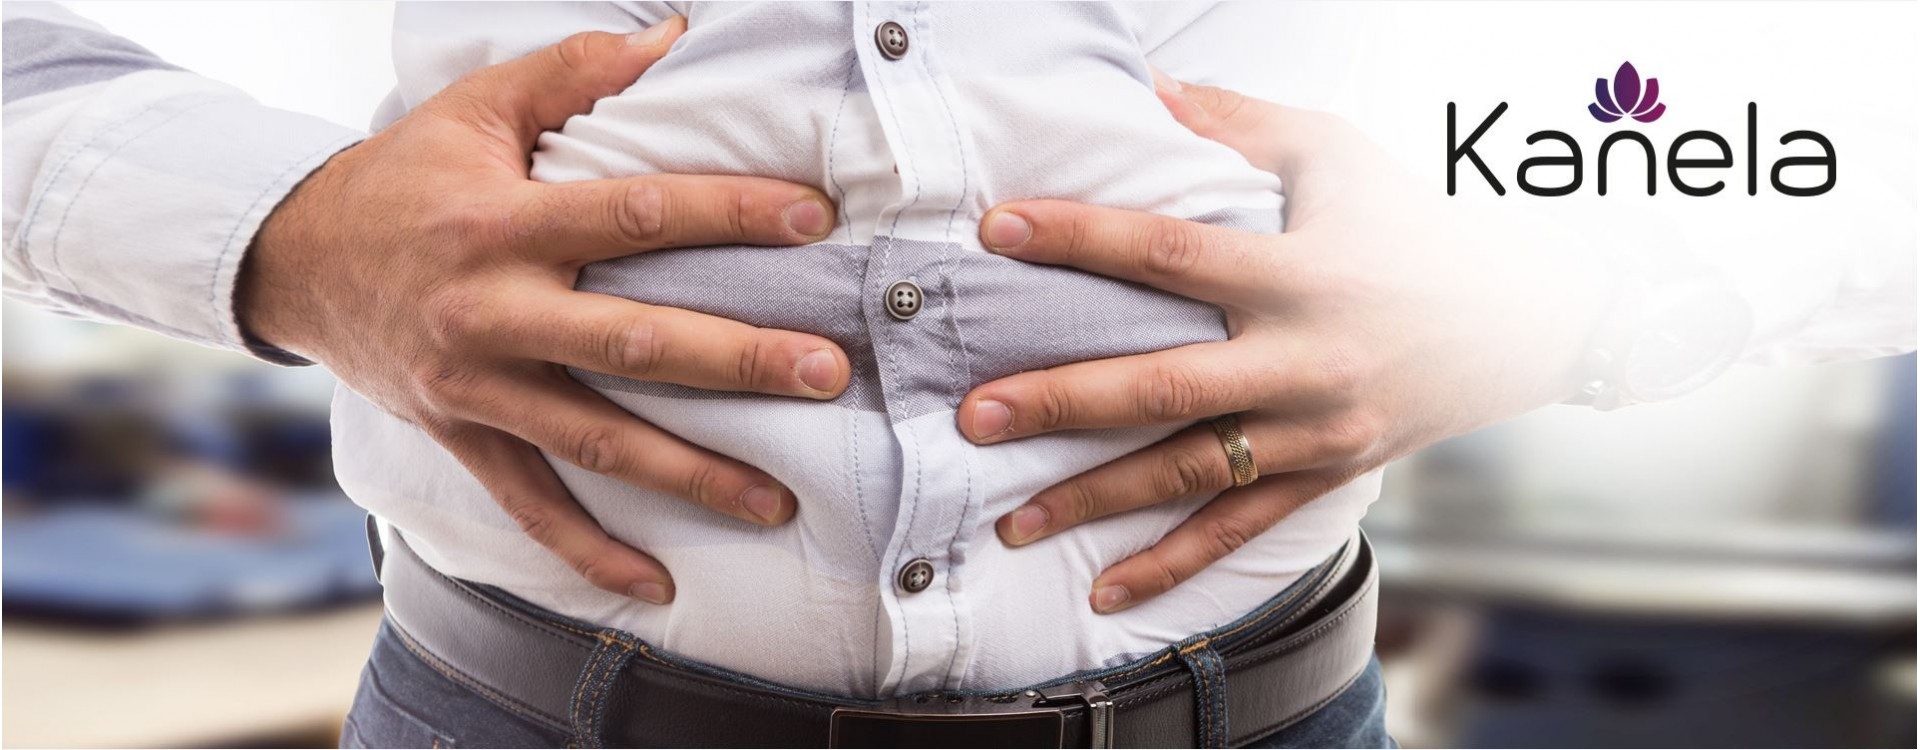 What helps against bloating?